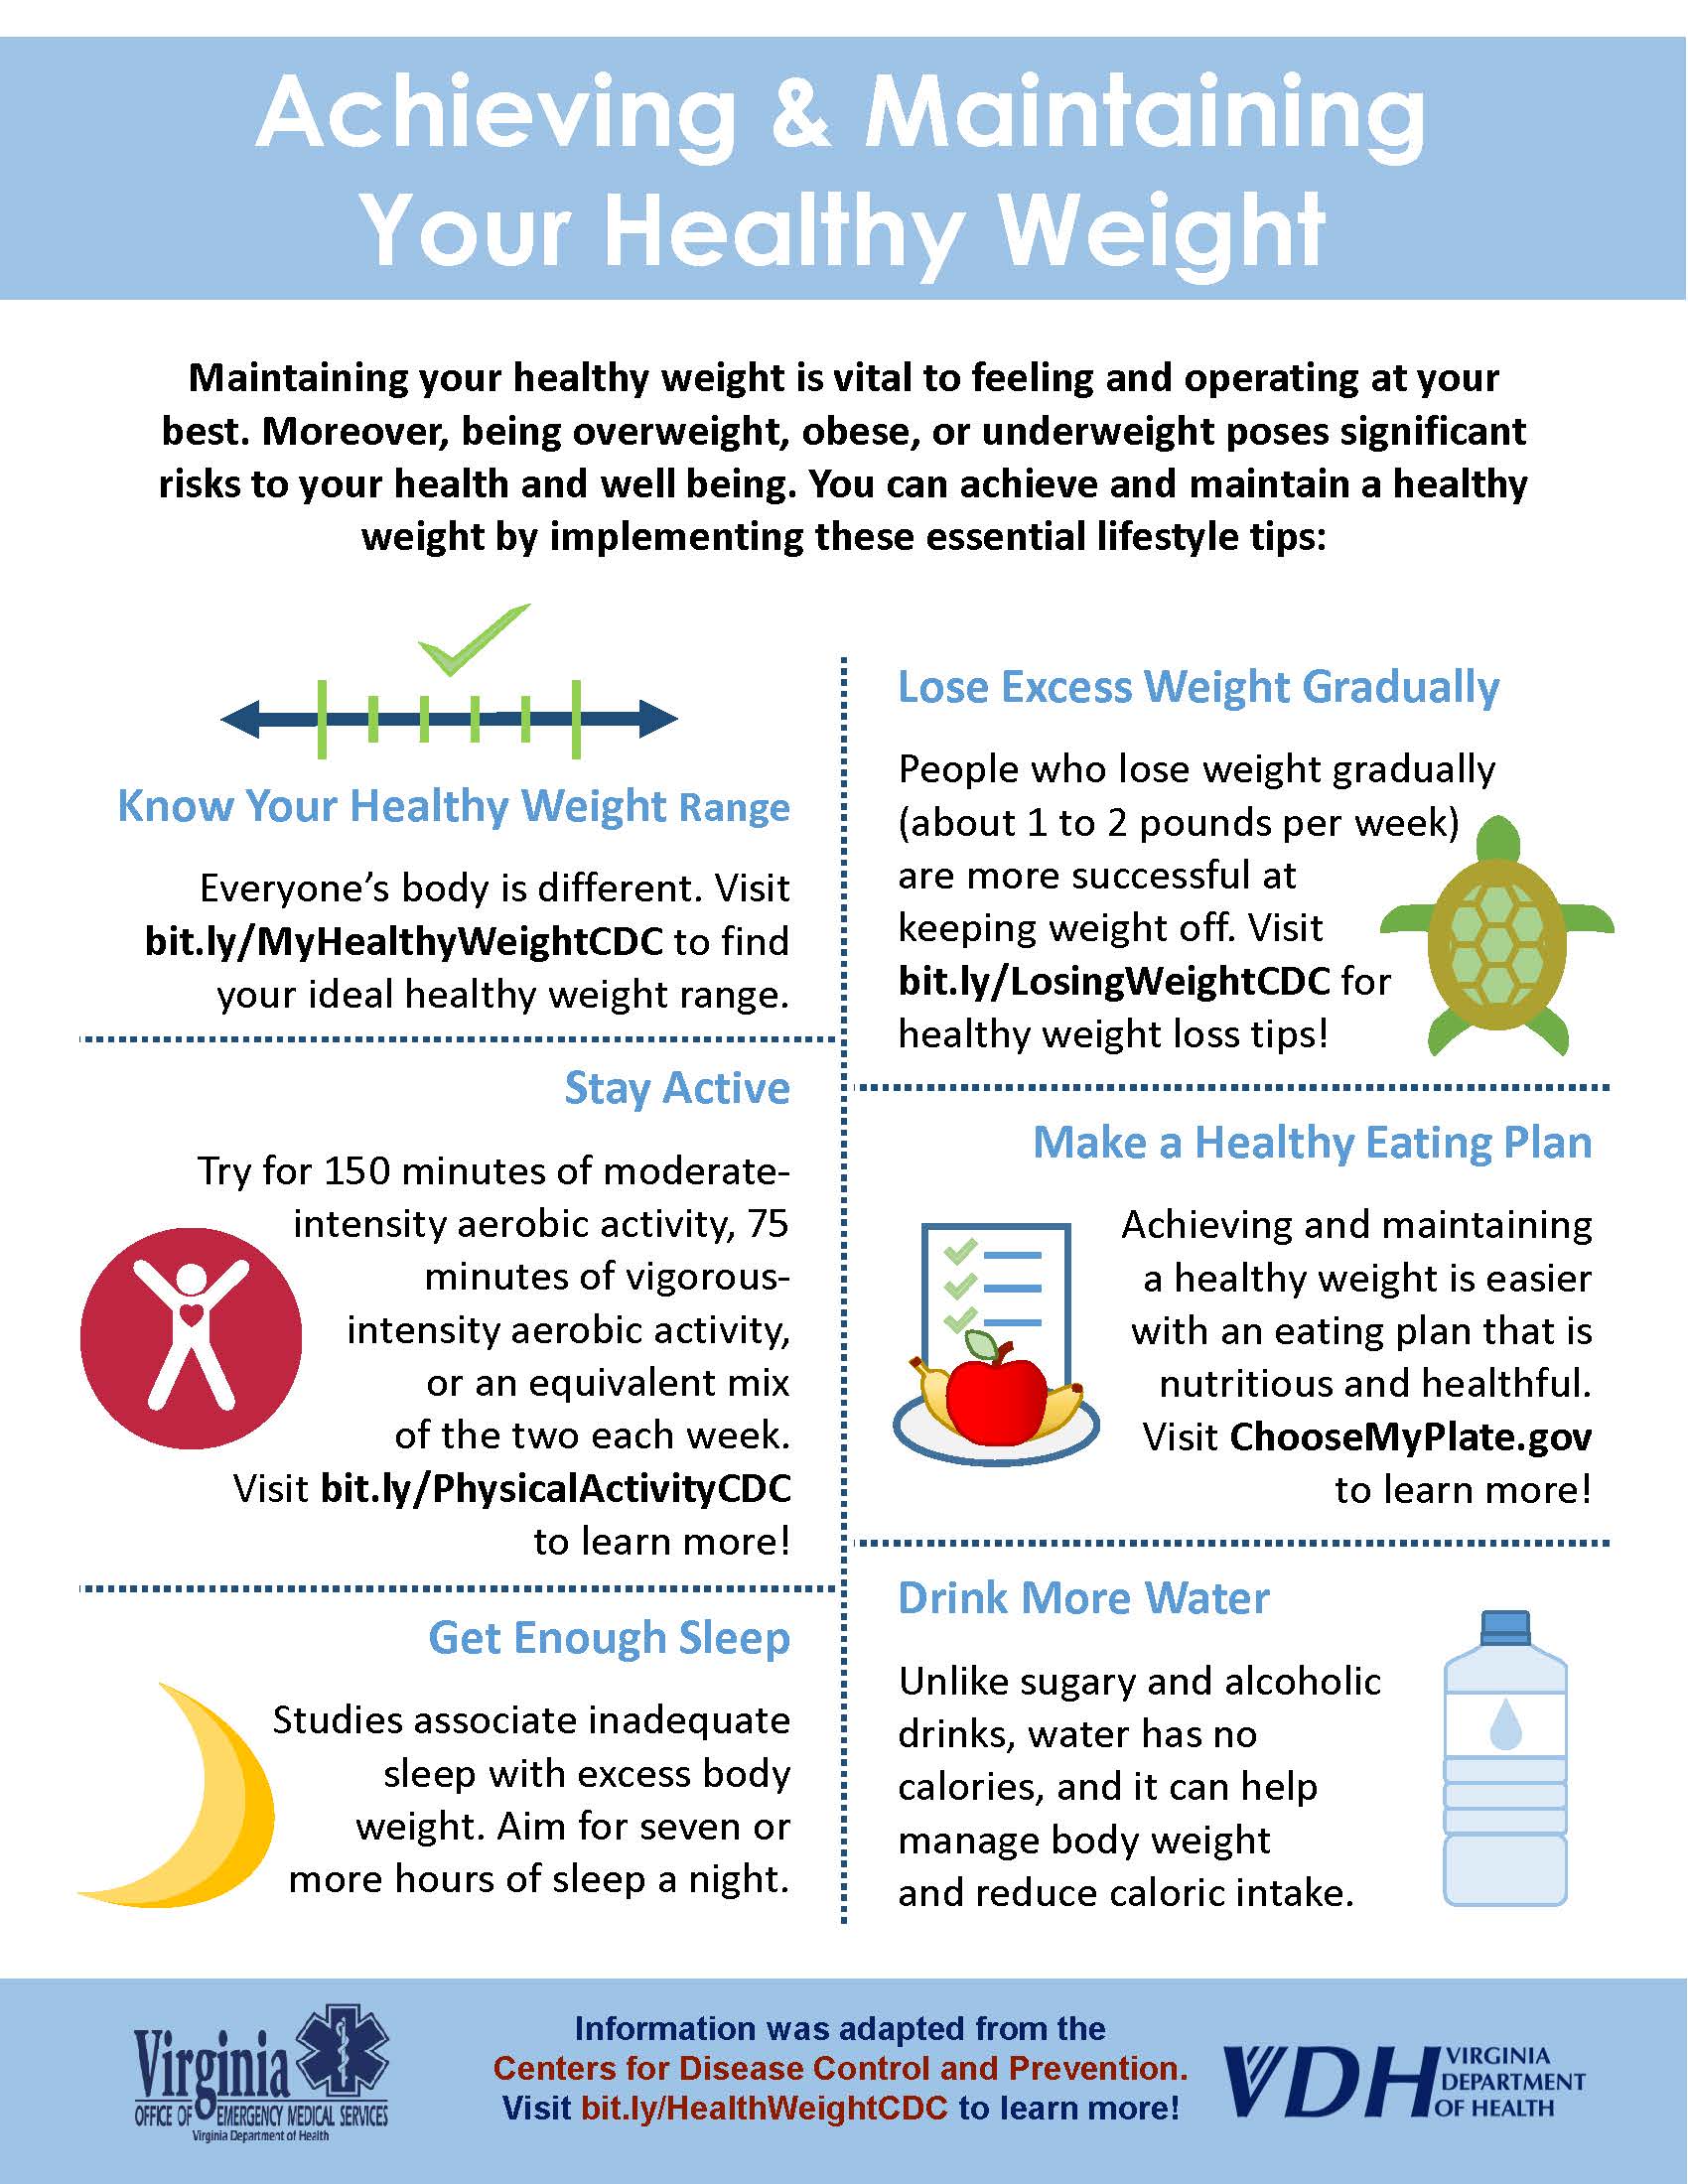 How Can I Maintain a Healthy Weight through Eating?